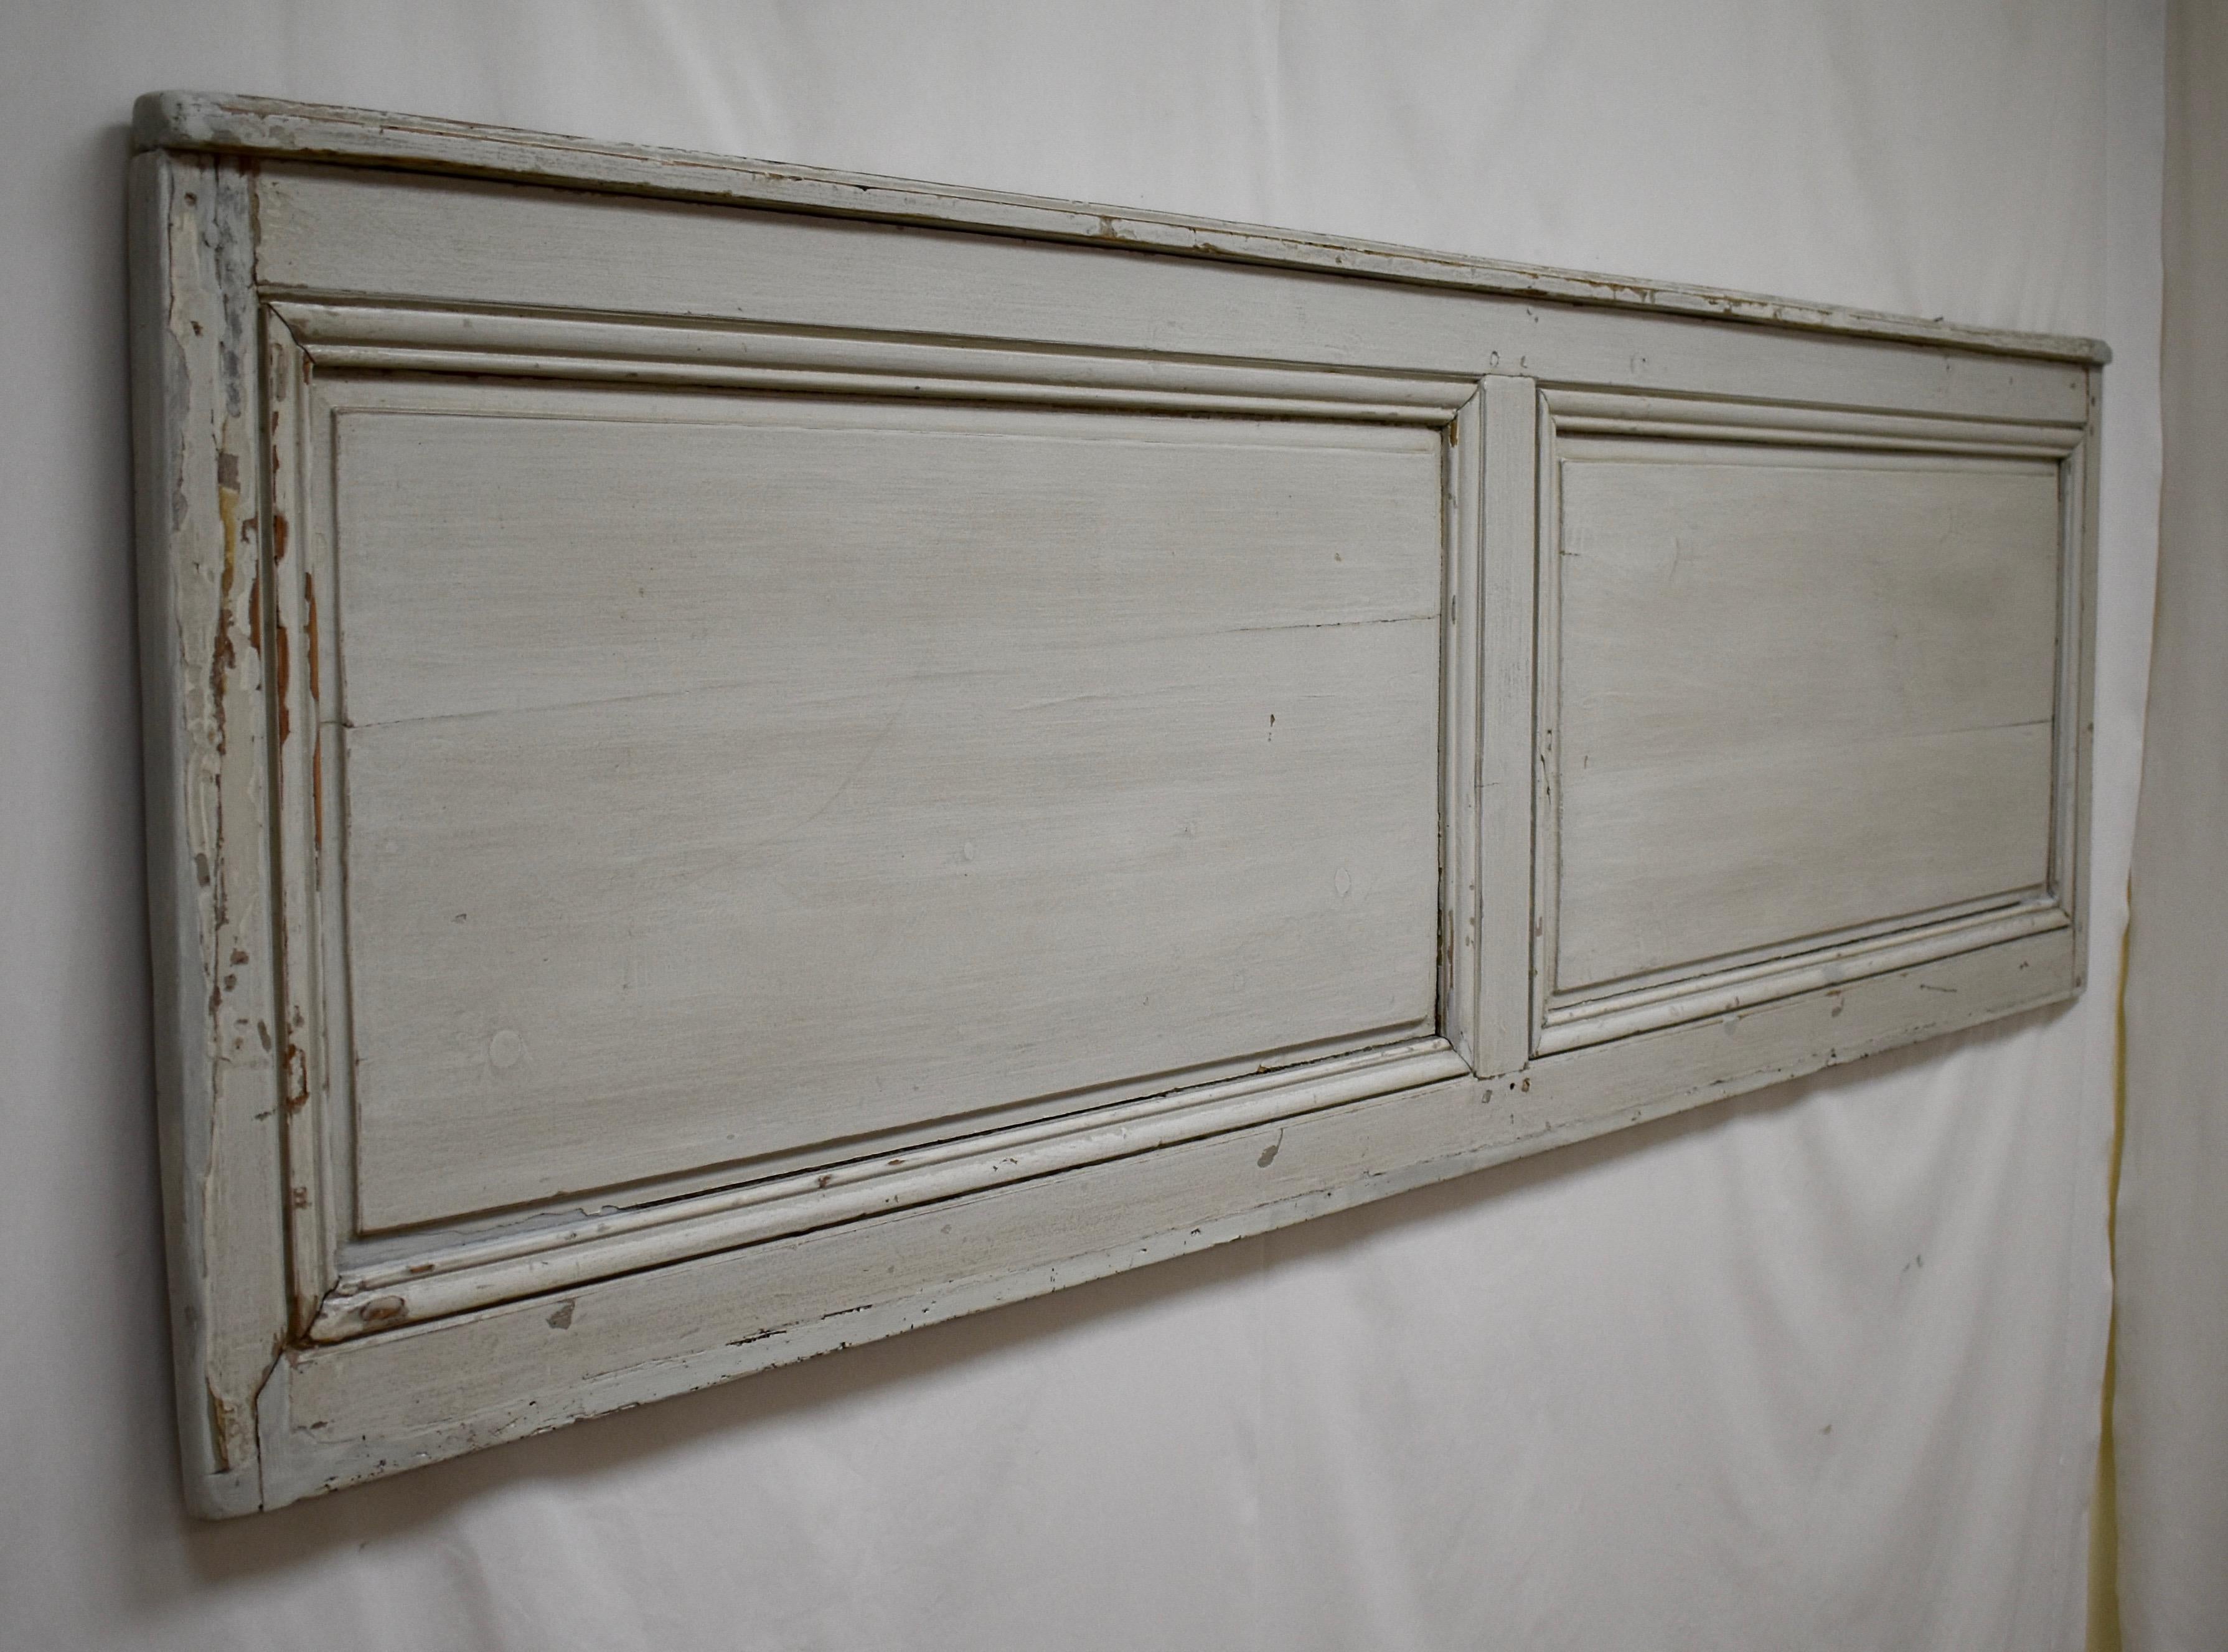 This painted pine wall panel, reclaimed from a 19th century French room, would make a great headboard for a Queen size bed. The two raised panels are pretty much symmetrical. One side is in original pale blue paint, the reverse is gloriously